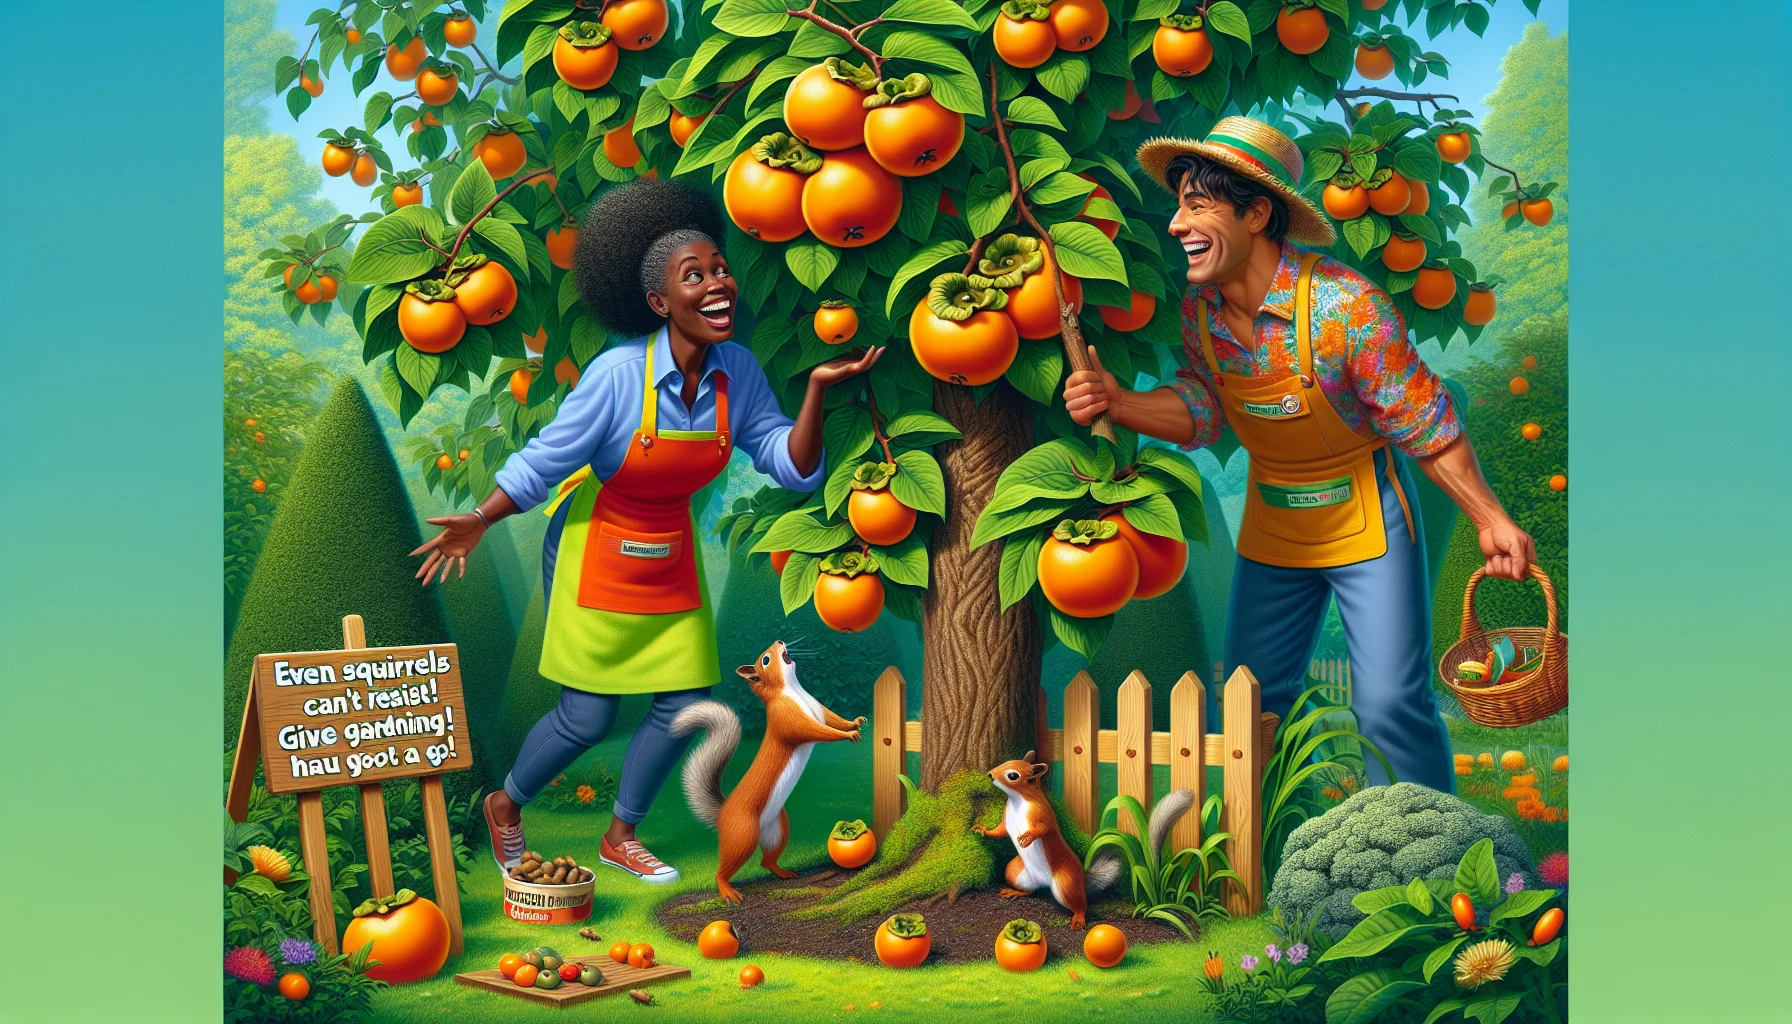 Imagine a vibrant and realistic scene in a lush green garden. In the center of the scene, there is a tree bearing ripe Fuyu persimmons, its fruits glowing orange amidst the green foliage. A Black woman and a Caucasian man, both wearing colorful gardener's attire, are laughing heartily as they notice a pair of squirrels in a playful tug of war over a fallen persimmon. A wooden signboard near the tree has a playful message that reads 'Even Squirrels Can't Resist! Give Gardening a Go!' The scene encapsulates the joy and intrigue that gardening can bring, inspiring viewers to take up the hobby.